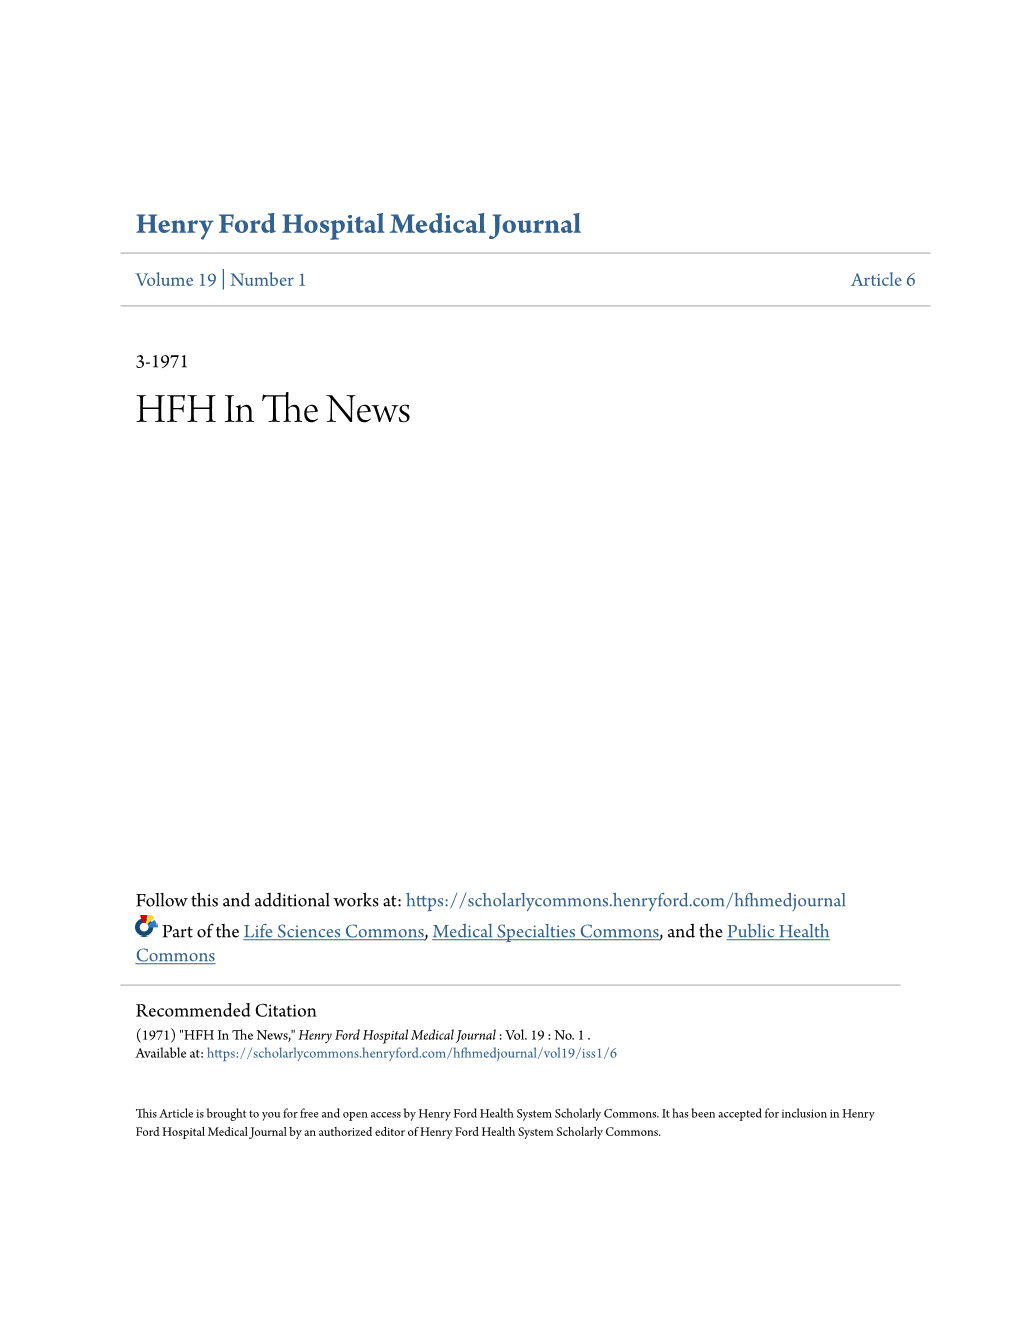 HFH in the NEWS Published for Alumni and Friends of Henry Ford Hospital, Detroit, Michigan Editor: R